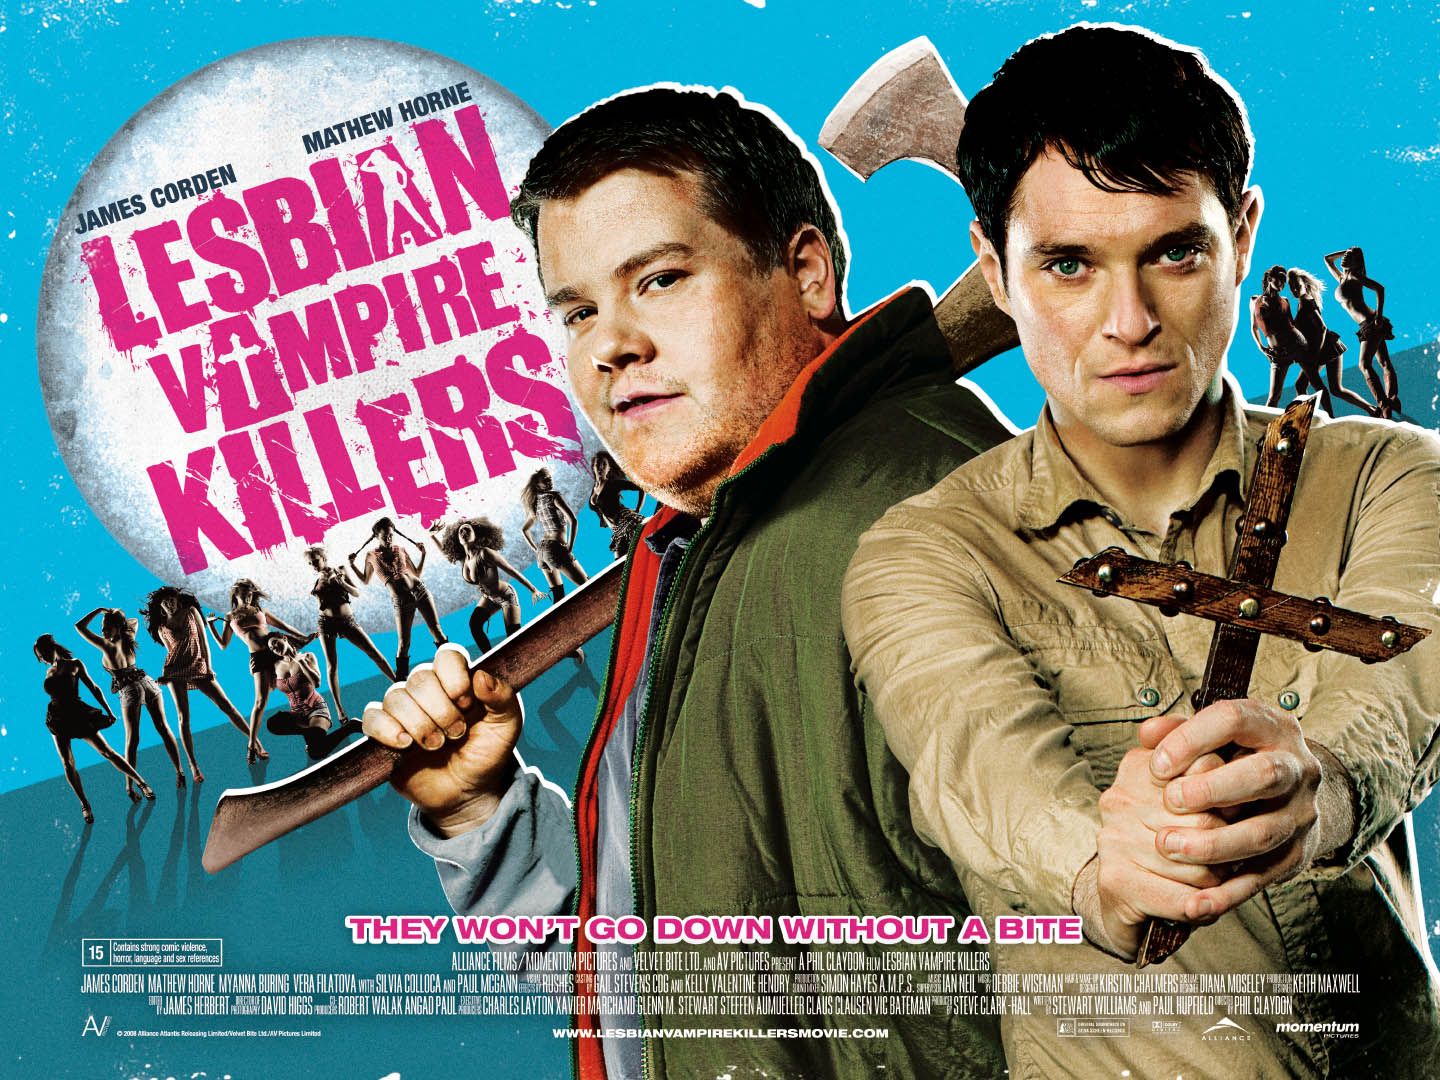 Extra Large Movie Poster Image for Lesbian Vampire Killers (#2 of 2)